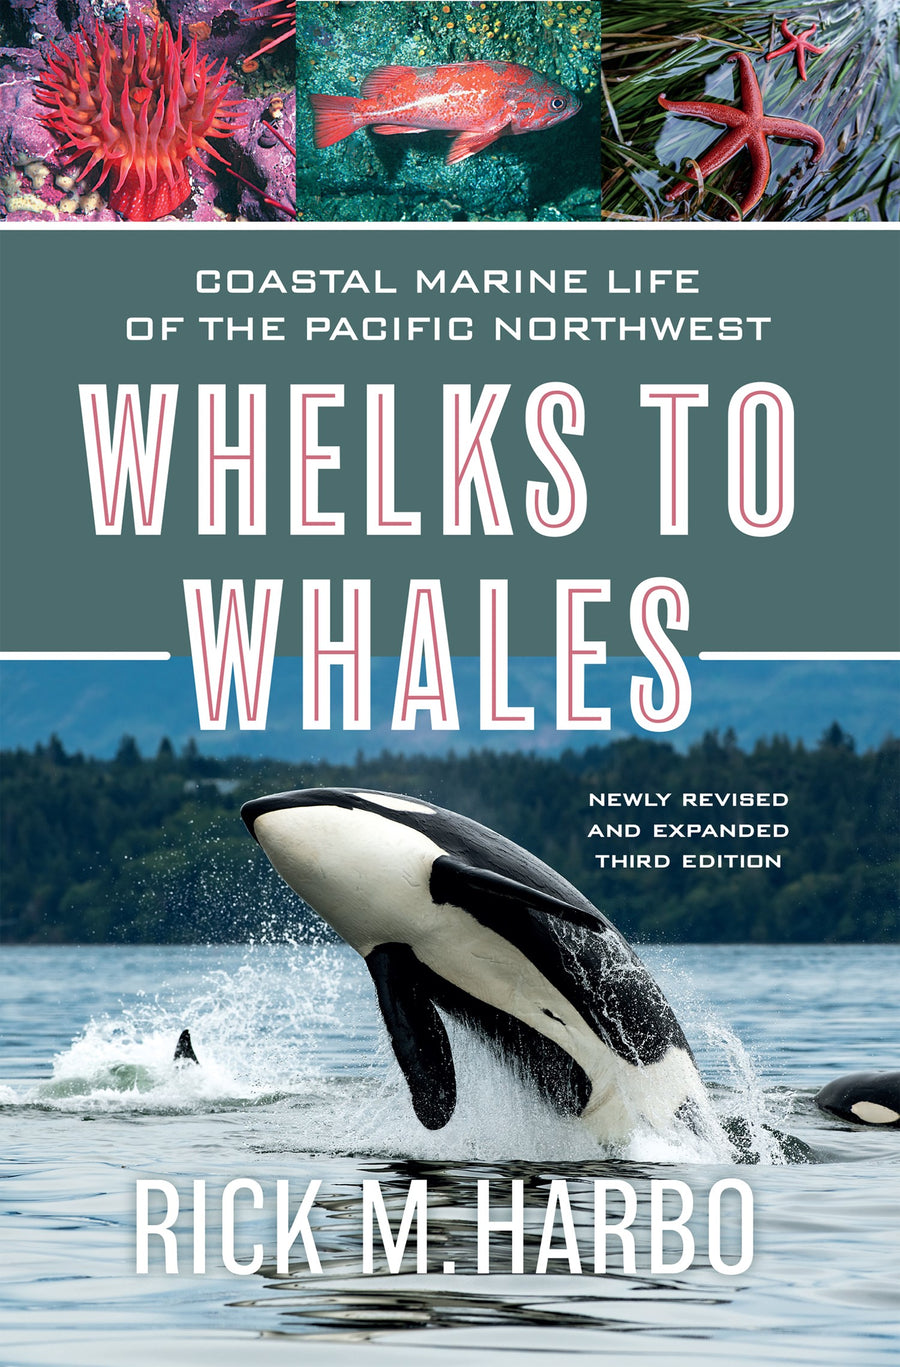 Whelks to Whales : Coastal Marine Life of the Pacific Northwest, Newly Revised and expanded Third edition